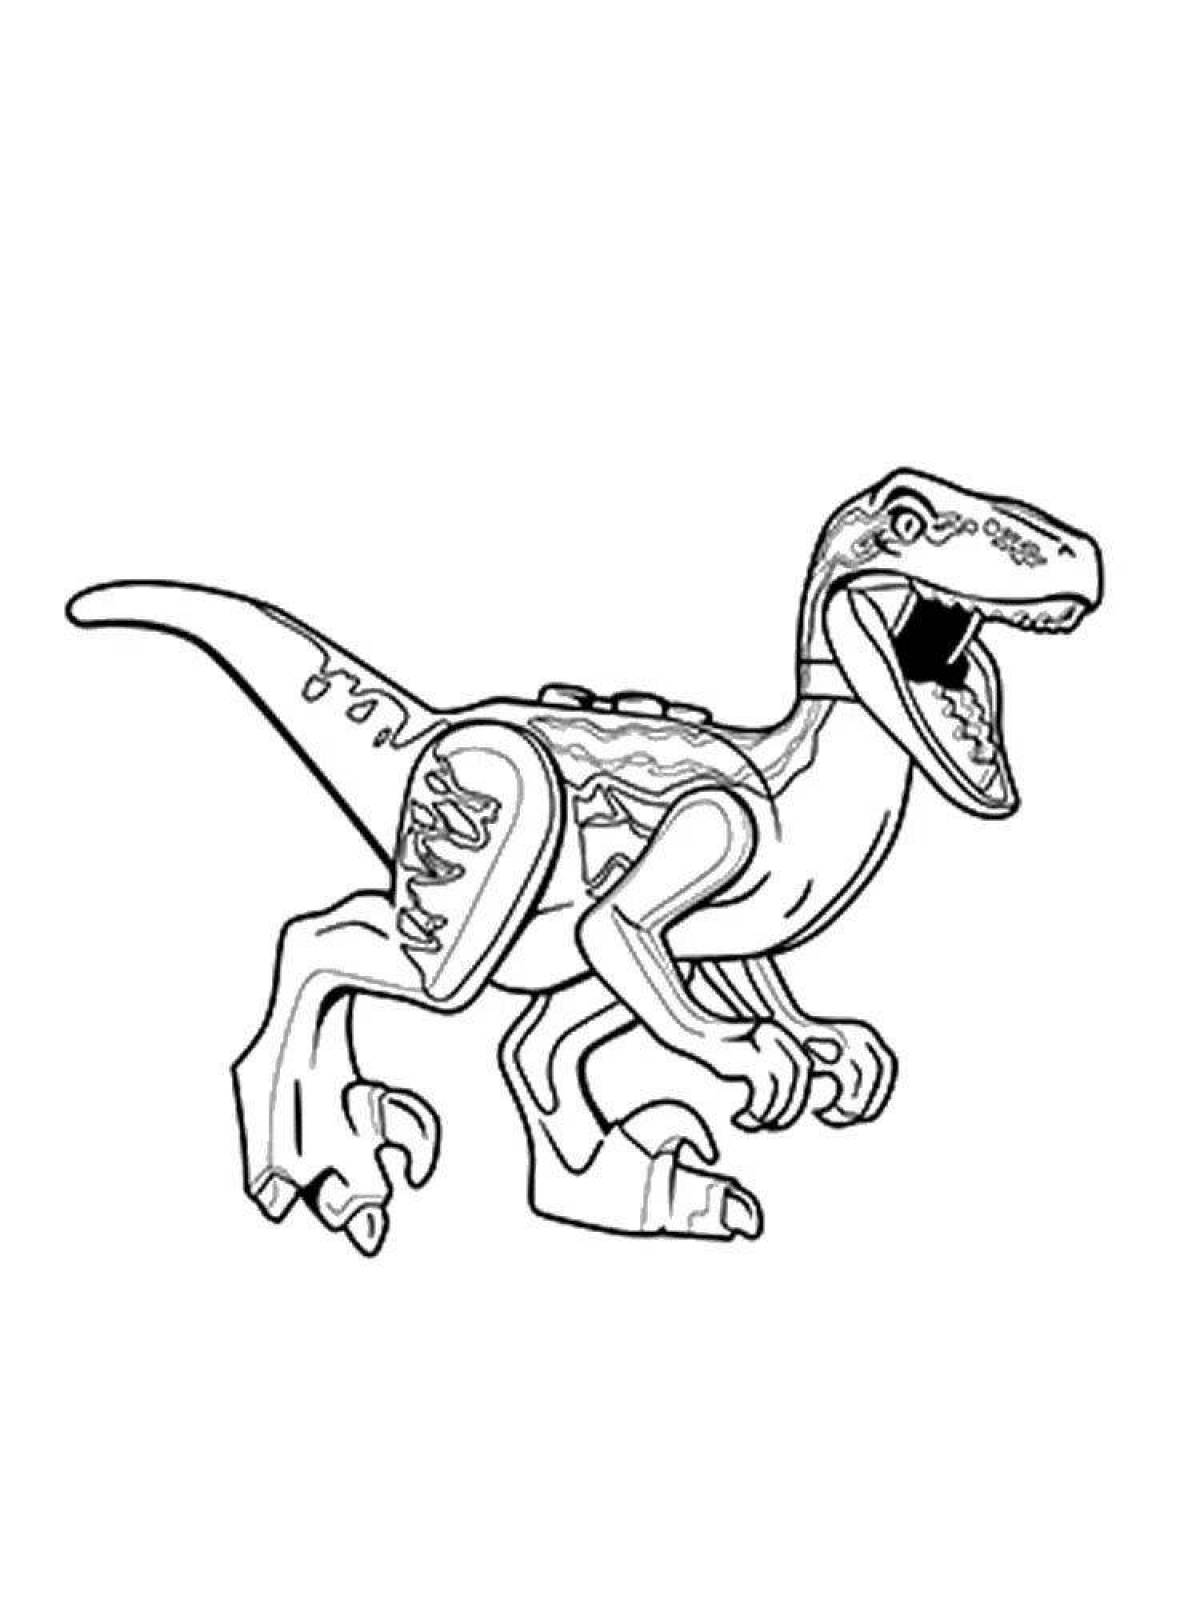 Glossy shaded velociraptor blue coloring page